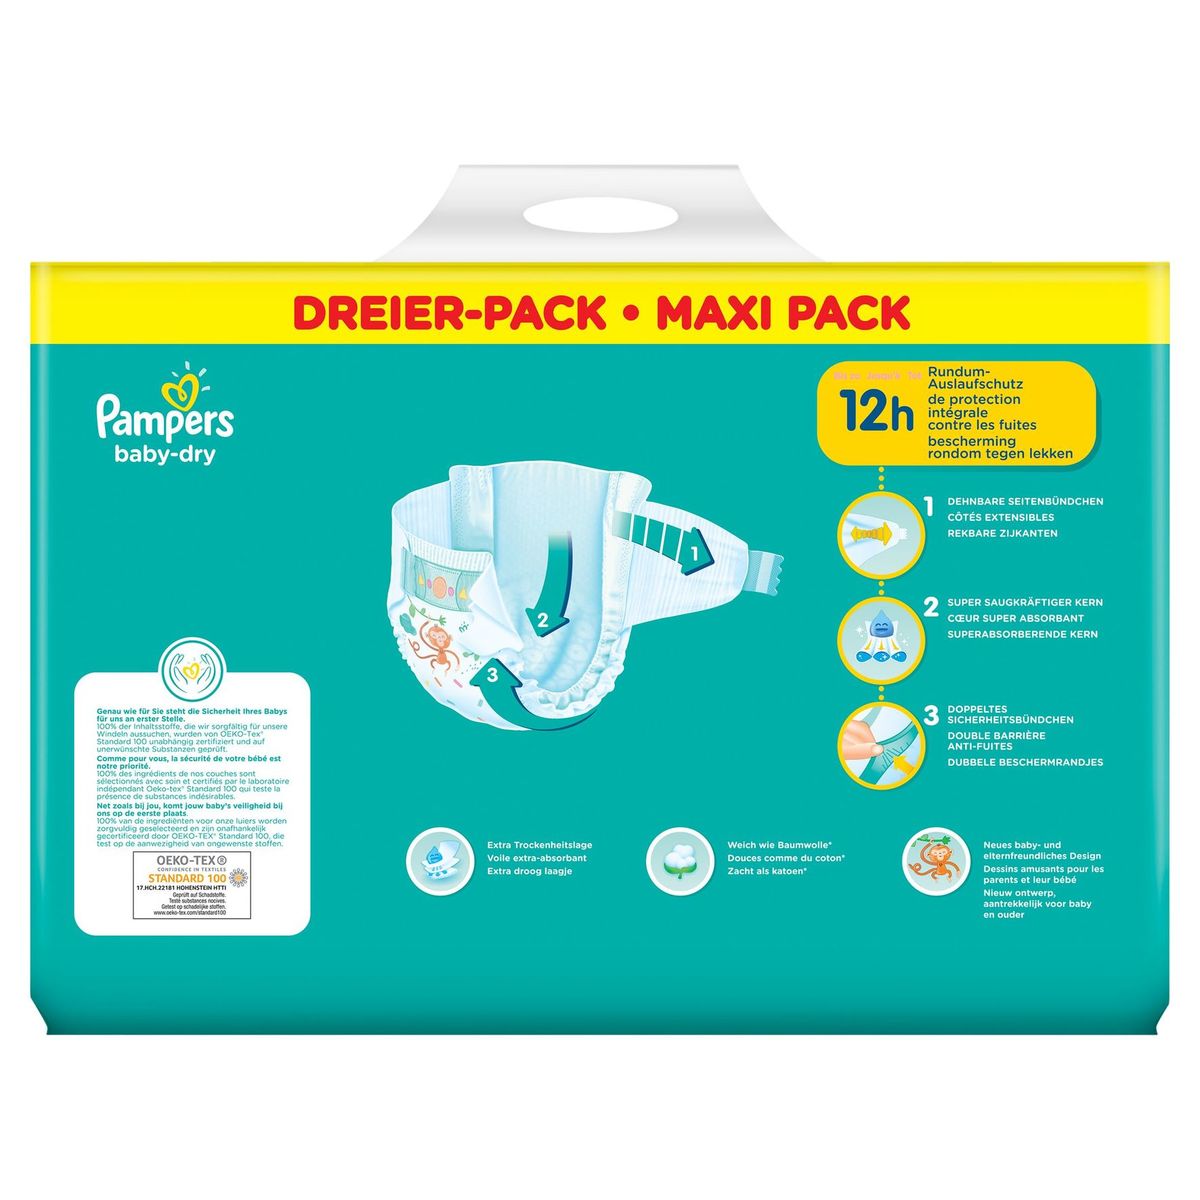 Pampers Baby-Dry Taille 5, 94 Couches 11-16kg